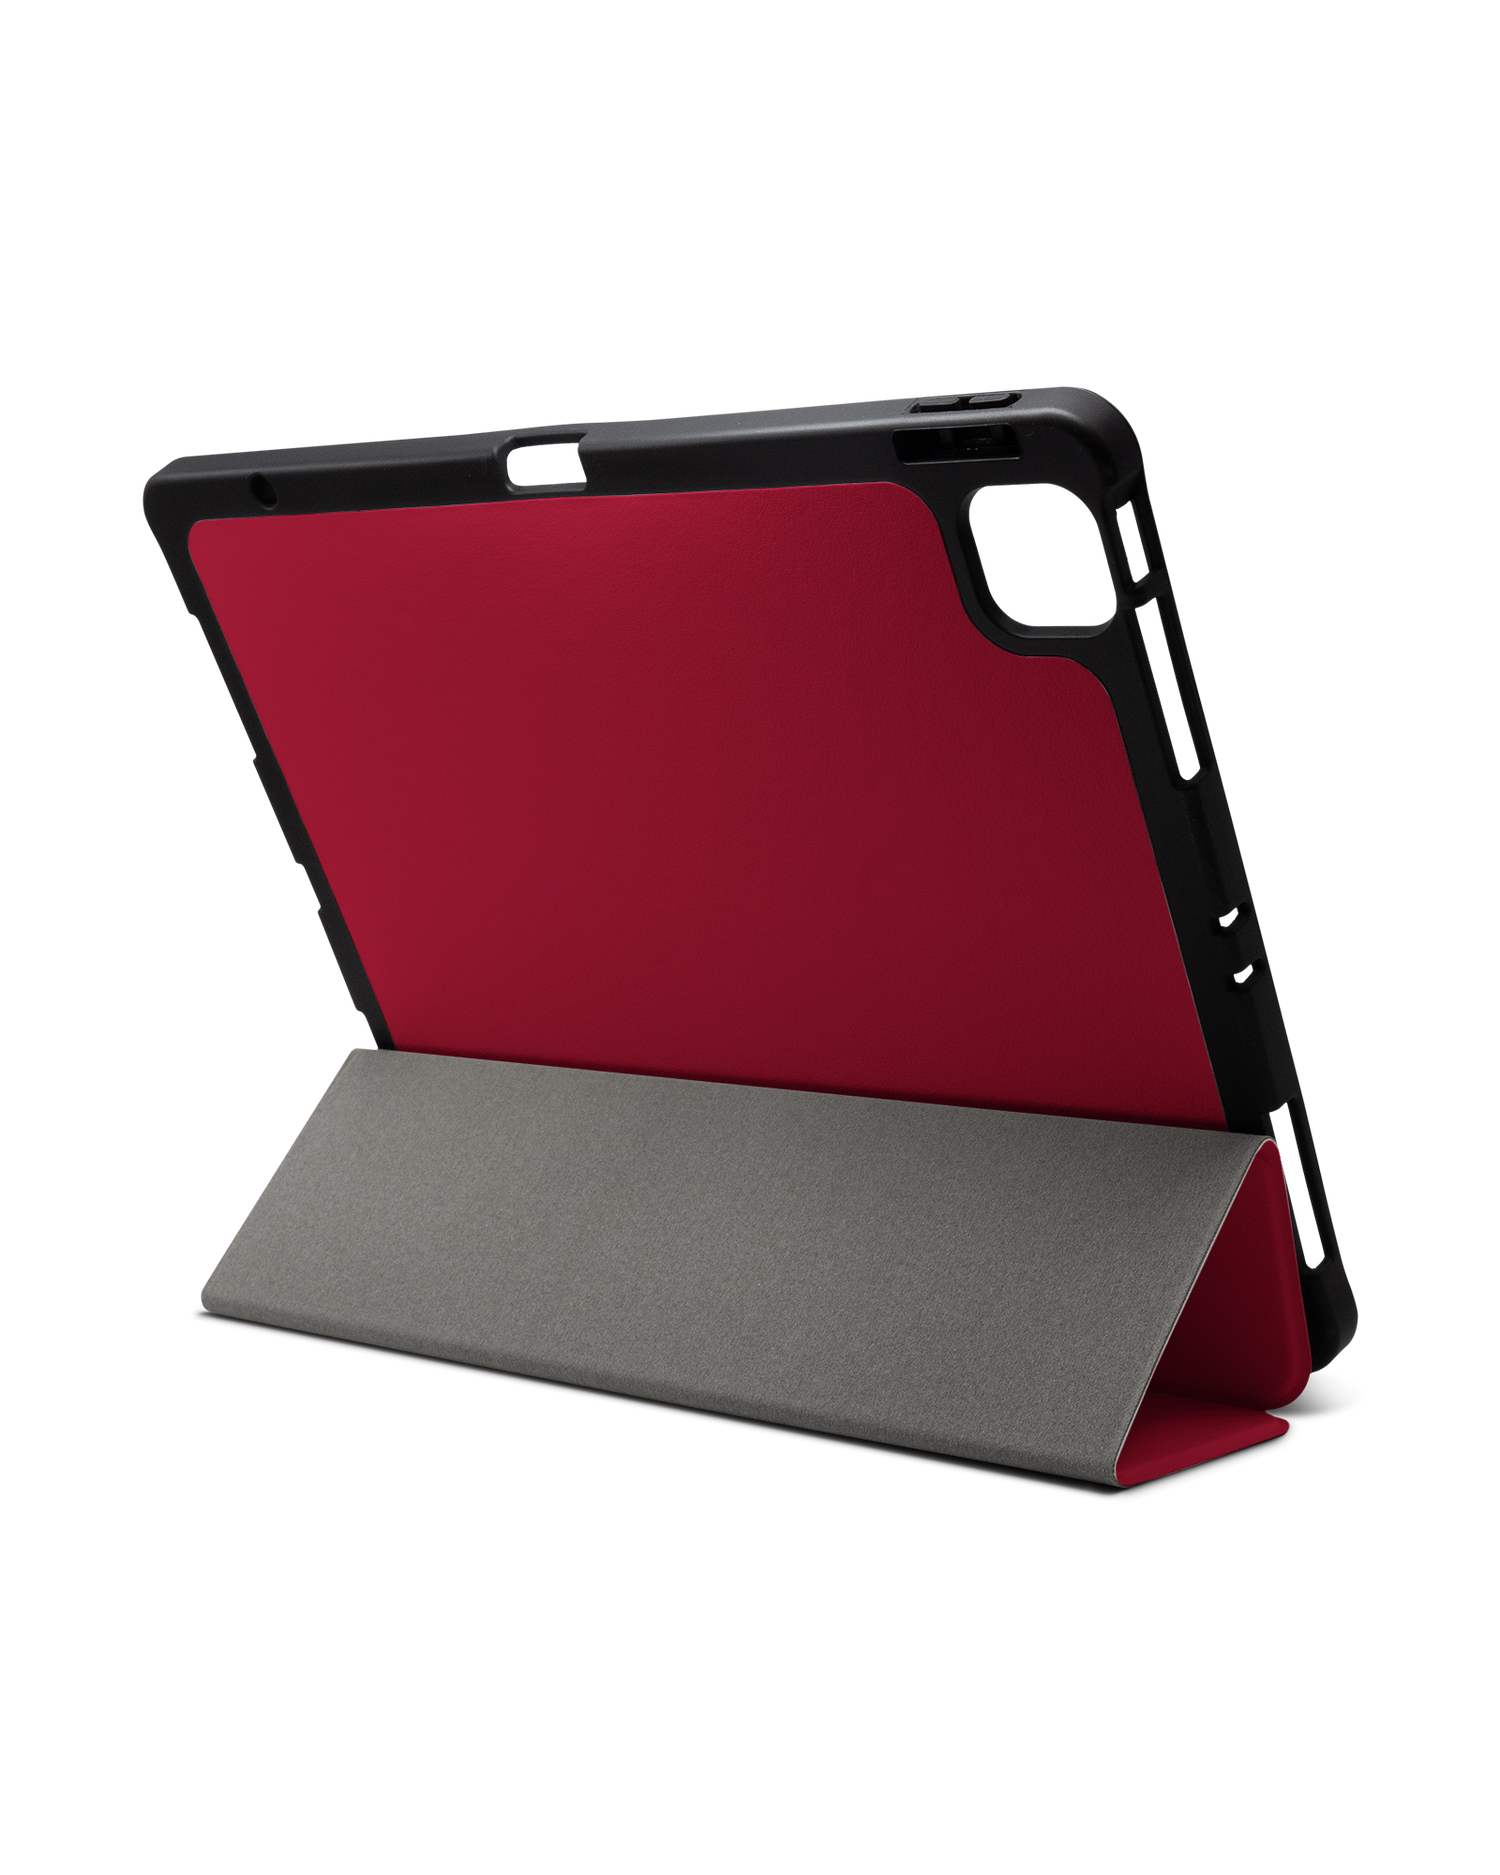 RED iPad Case with Pencil Holder for Apple iPad Pro 6 12.9